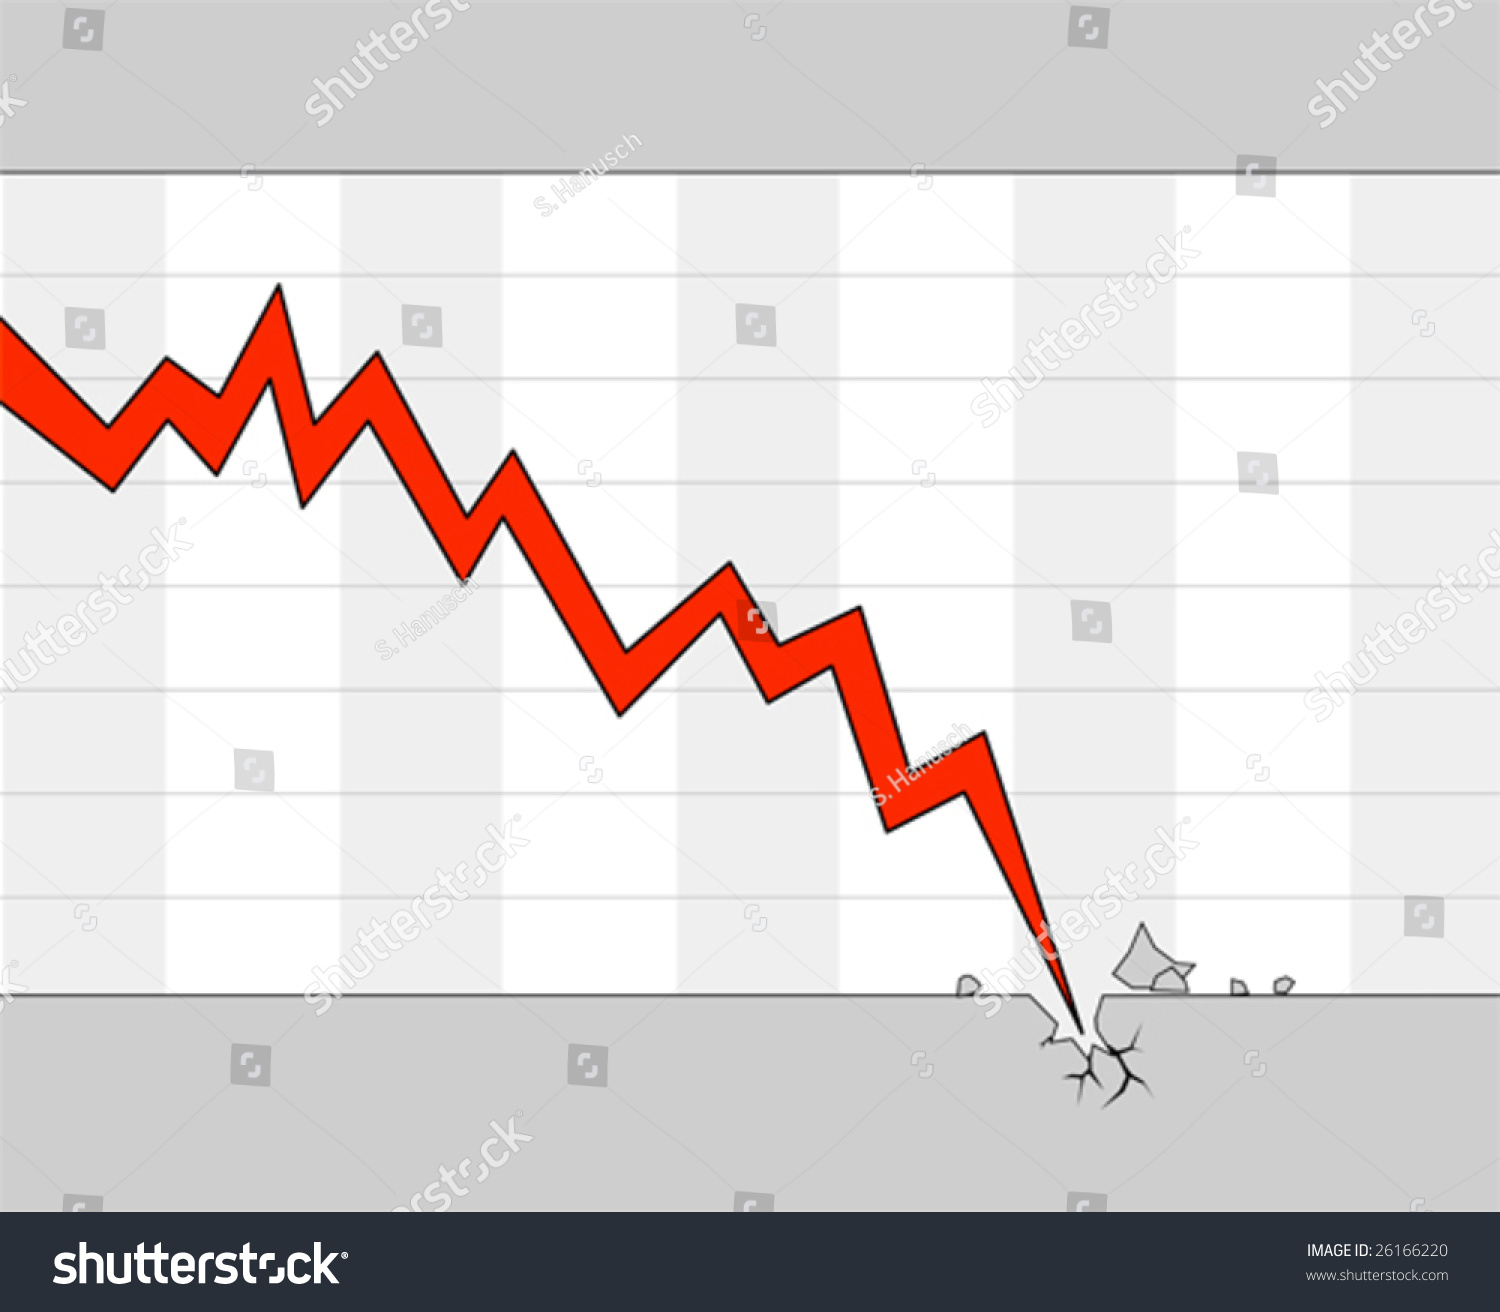 stock-vector-negative-business-chart-ill